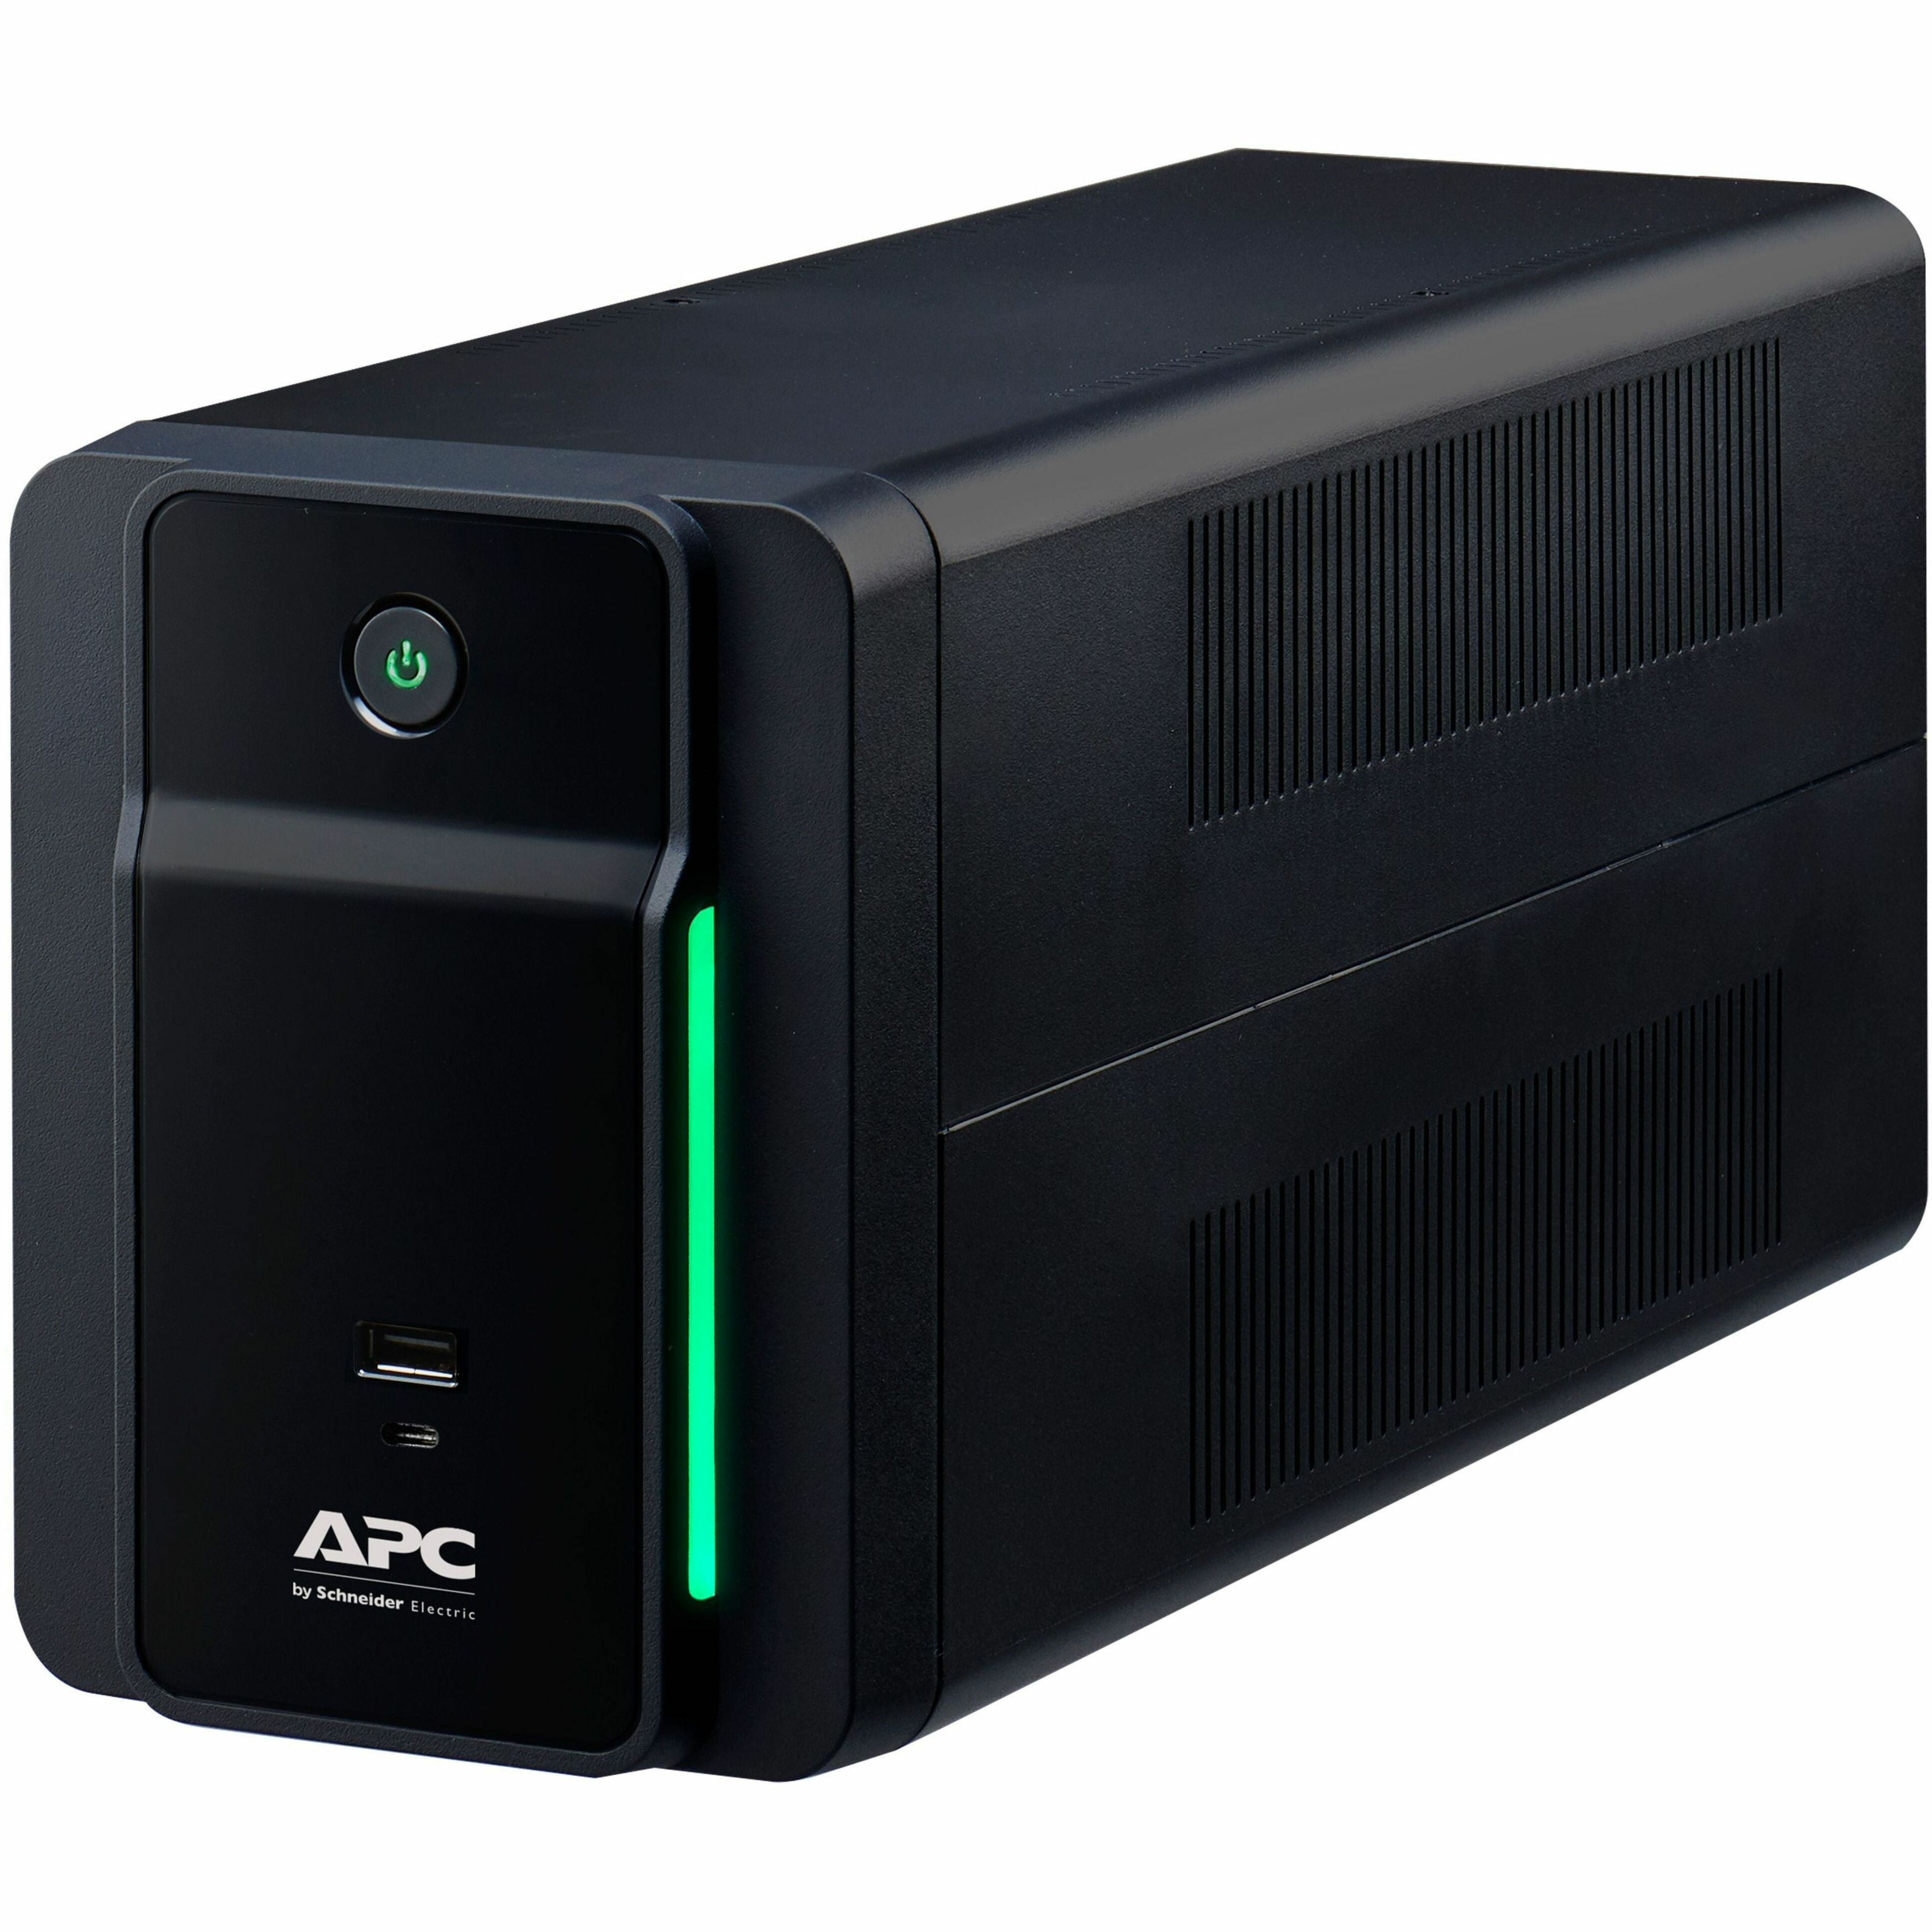 APC BVK750M2 Back-UPS 750VA Tower UPS, 3 Year Limited Warranty, Low Battery Alarm, Environmentally Friendly, 120V Input Voltage, 750 VA/410W Load Capacity, Stepped Approximated Sine Wave, 60Hz Output Frequency, 4 x NEMA 5-15R Receptacles